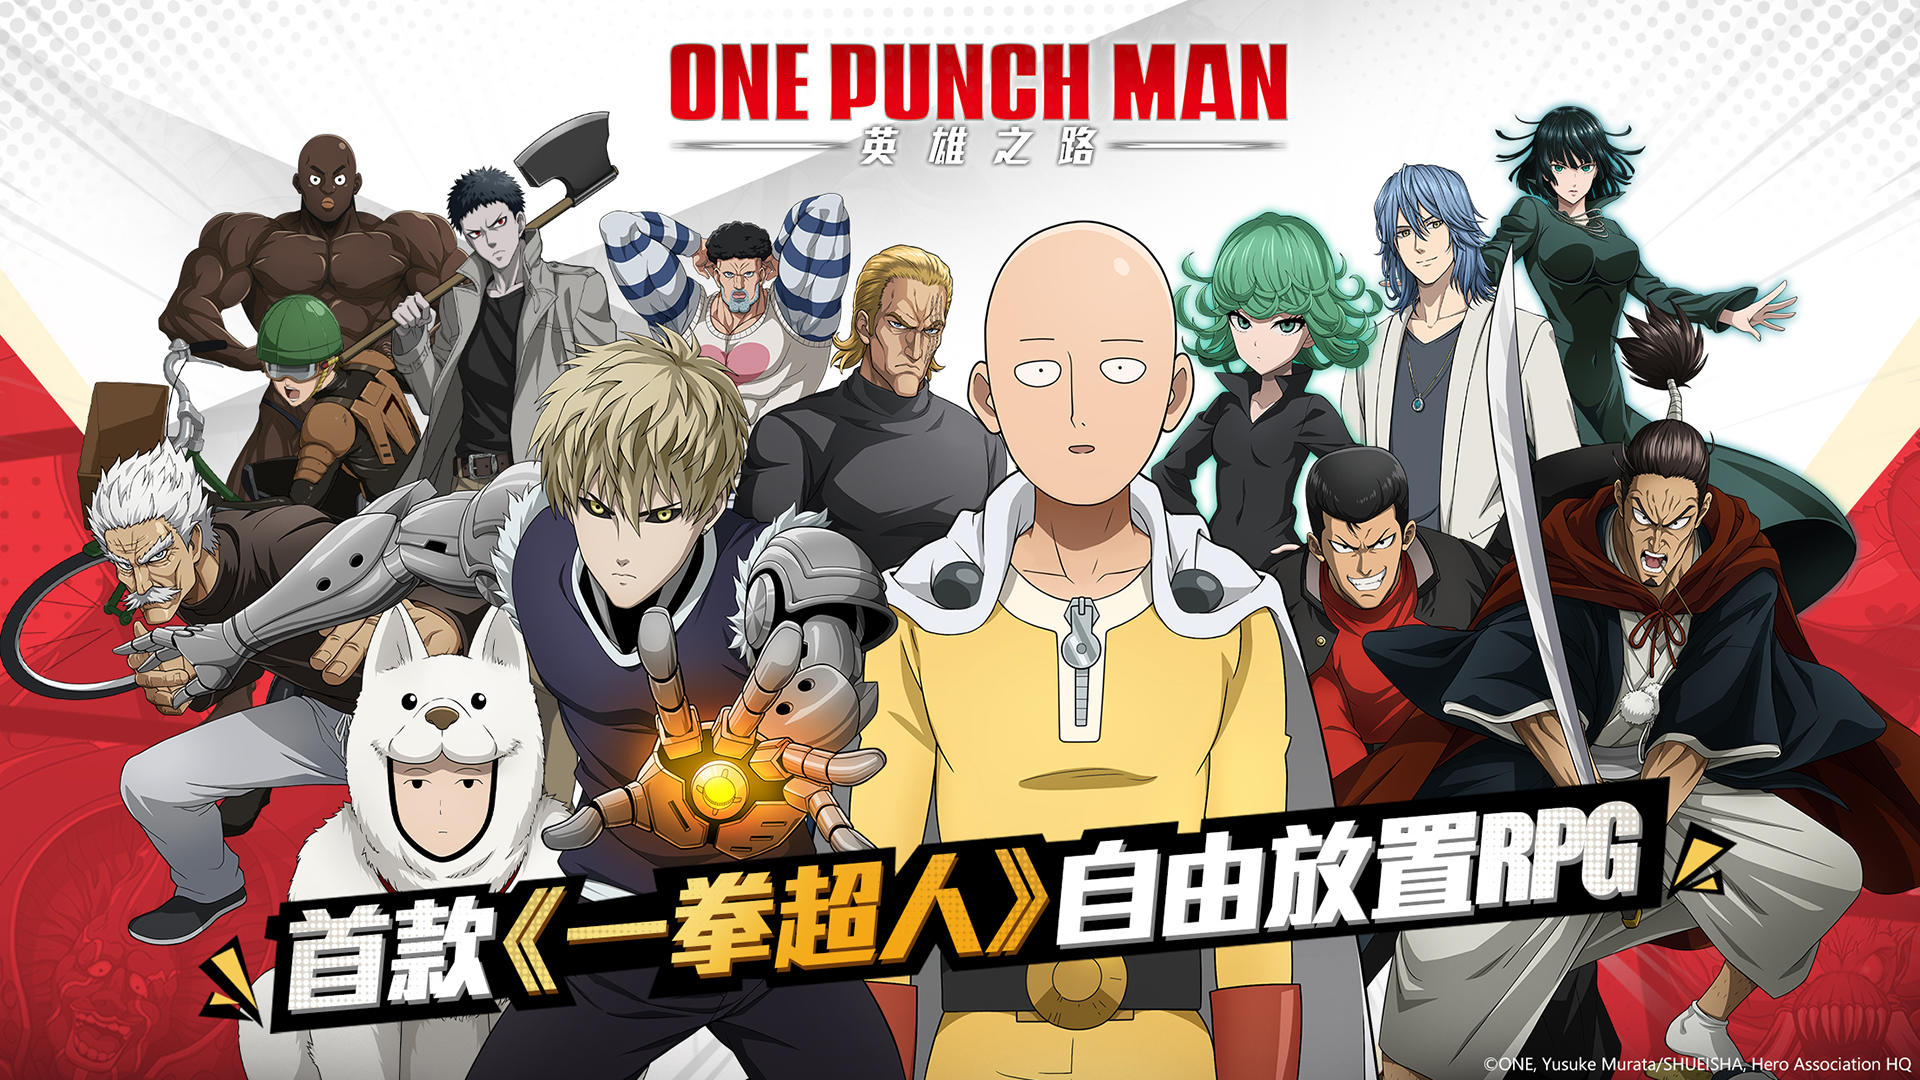 One Punch Man World Mod APK v1.5 Games for Android, by APK Download, Nov,  2023